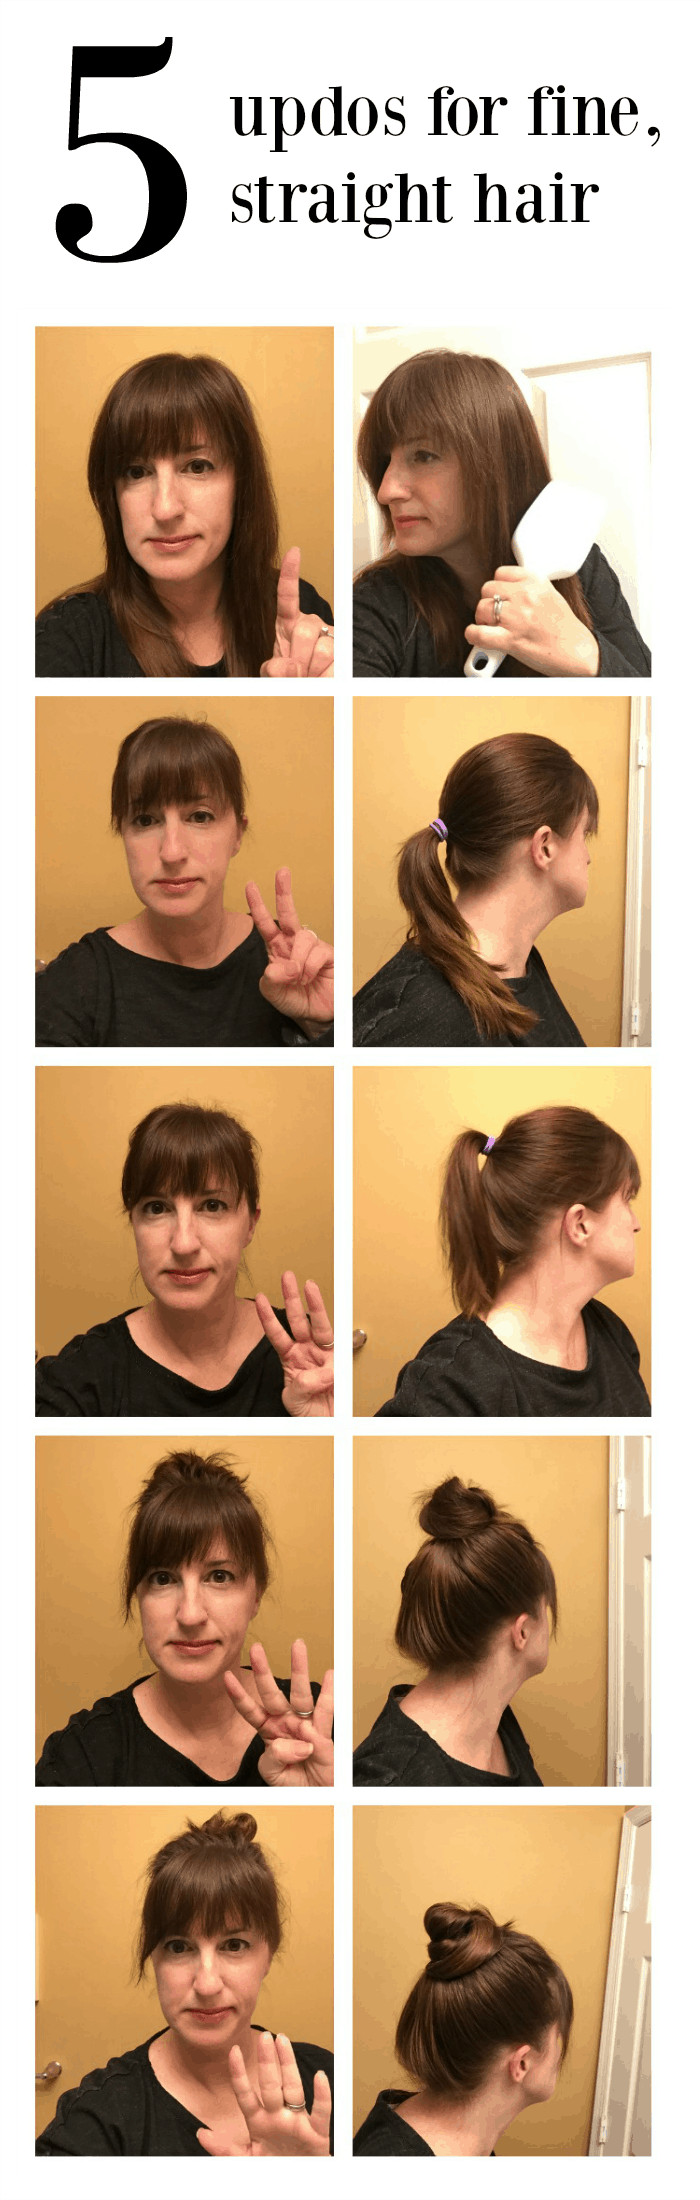 Five Updo Hairstyles for Fine Straight Hair - All Things Fadra